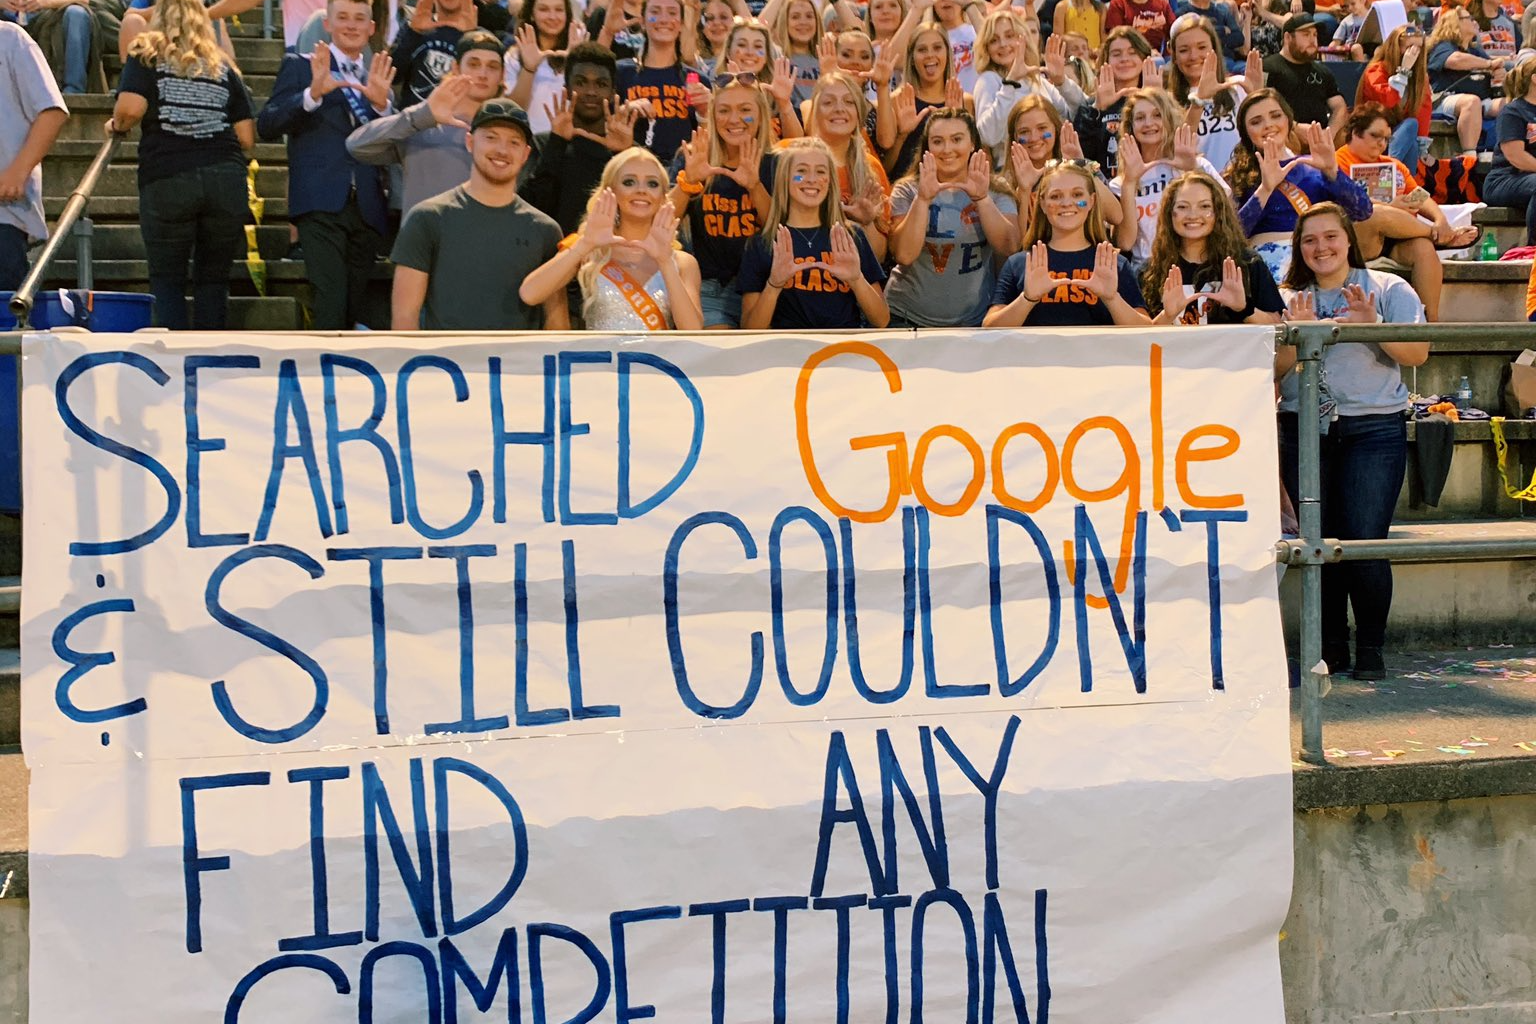 Male and female high school students holding up the U symbol with their hands standing behind a sign that says "Search Google & still couldn't find any competition."